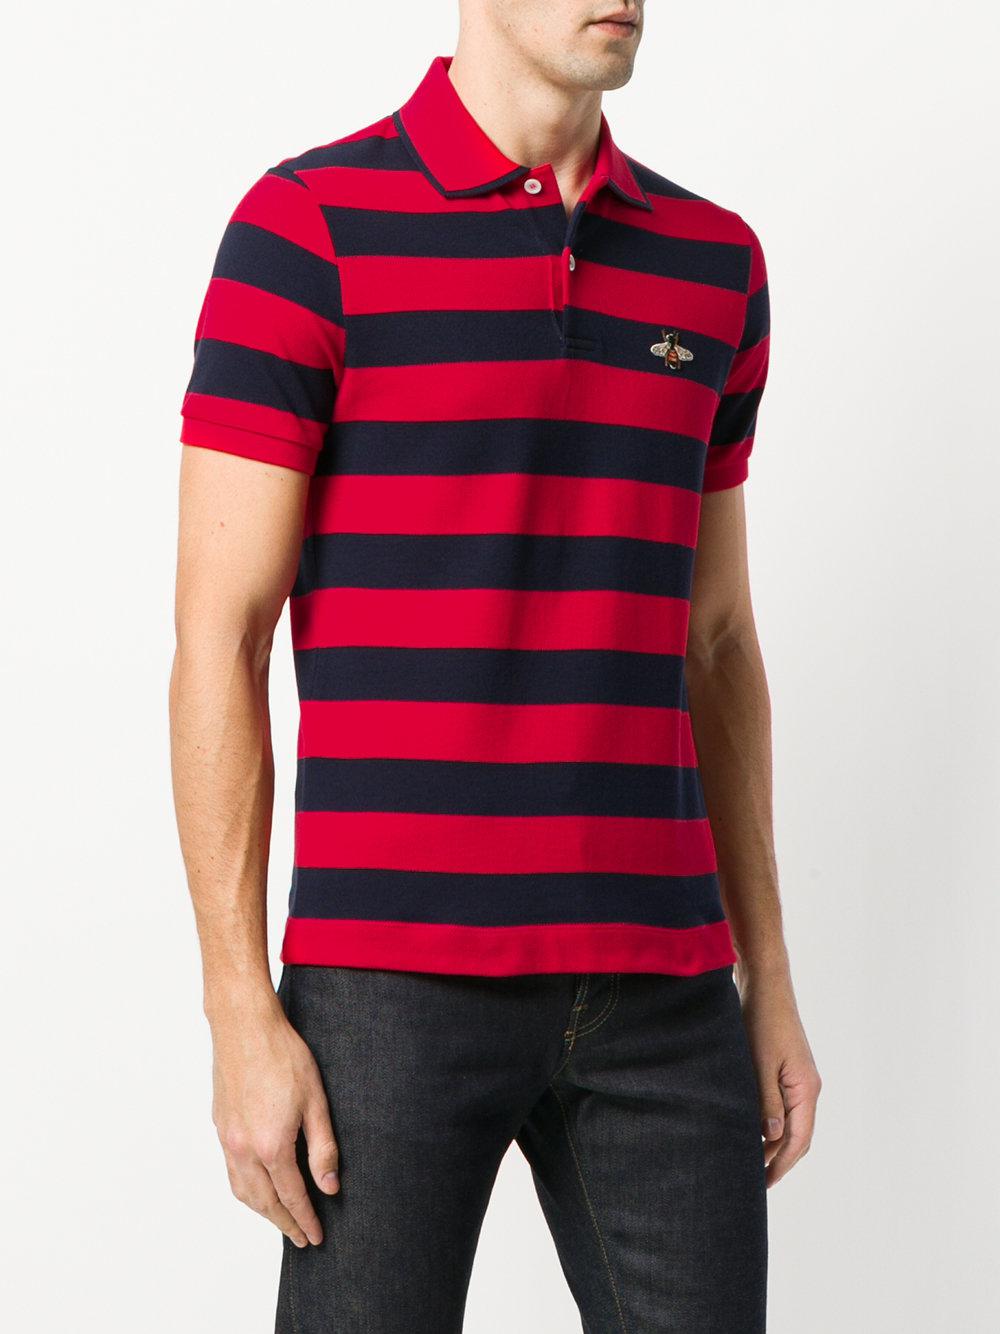 Vær venlig tom vi Gucci Cotton Polo With Bee Appliqué in Red for Men - Lyst